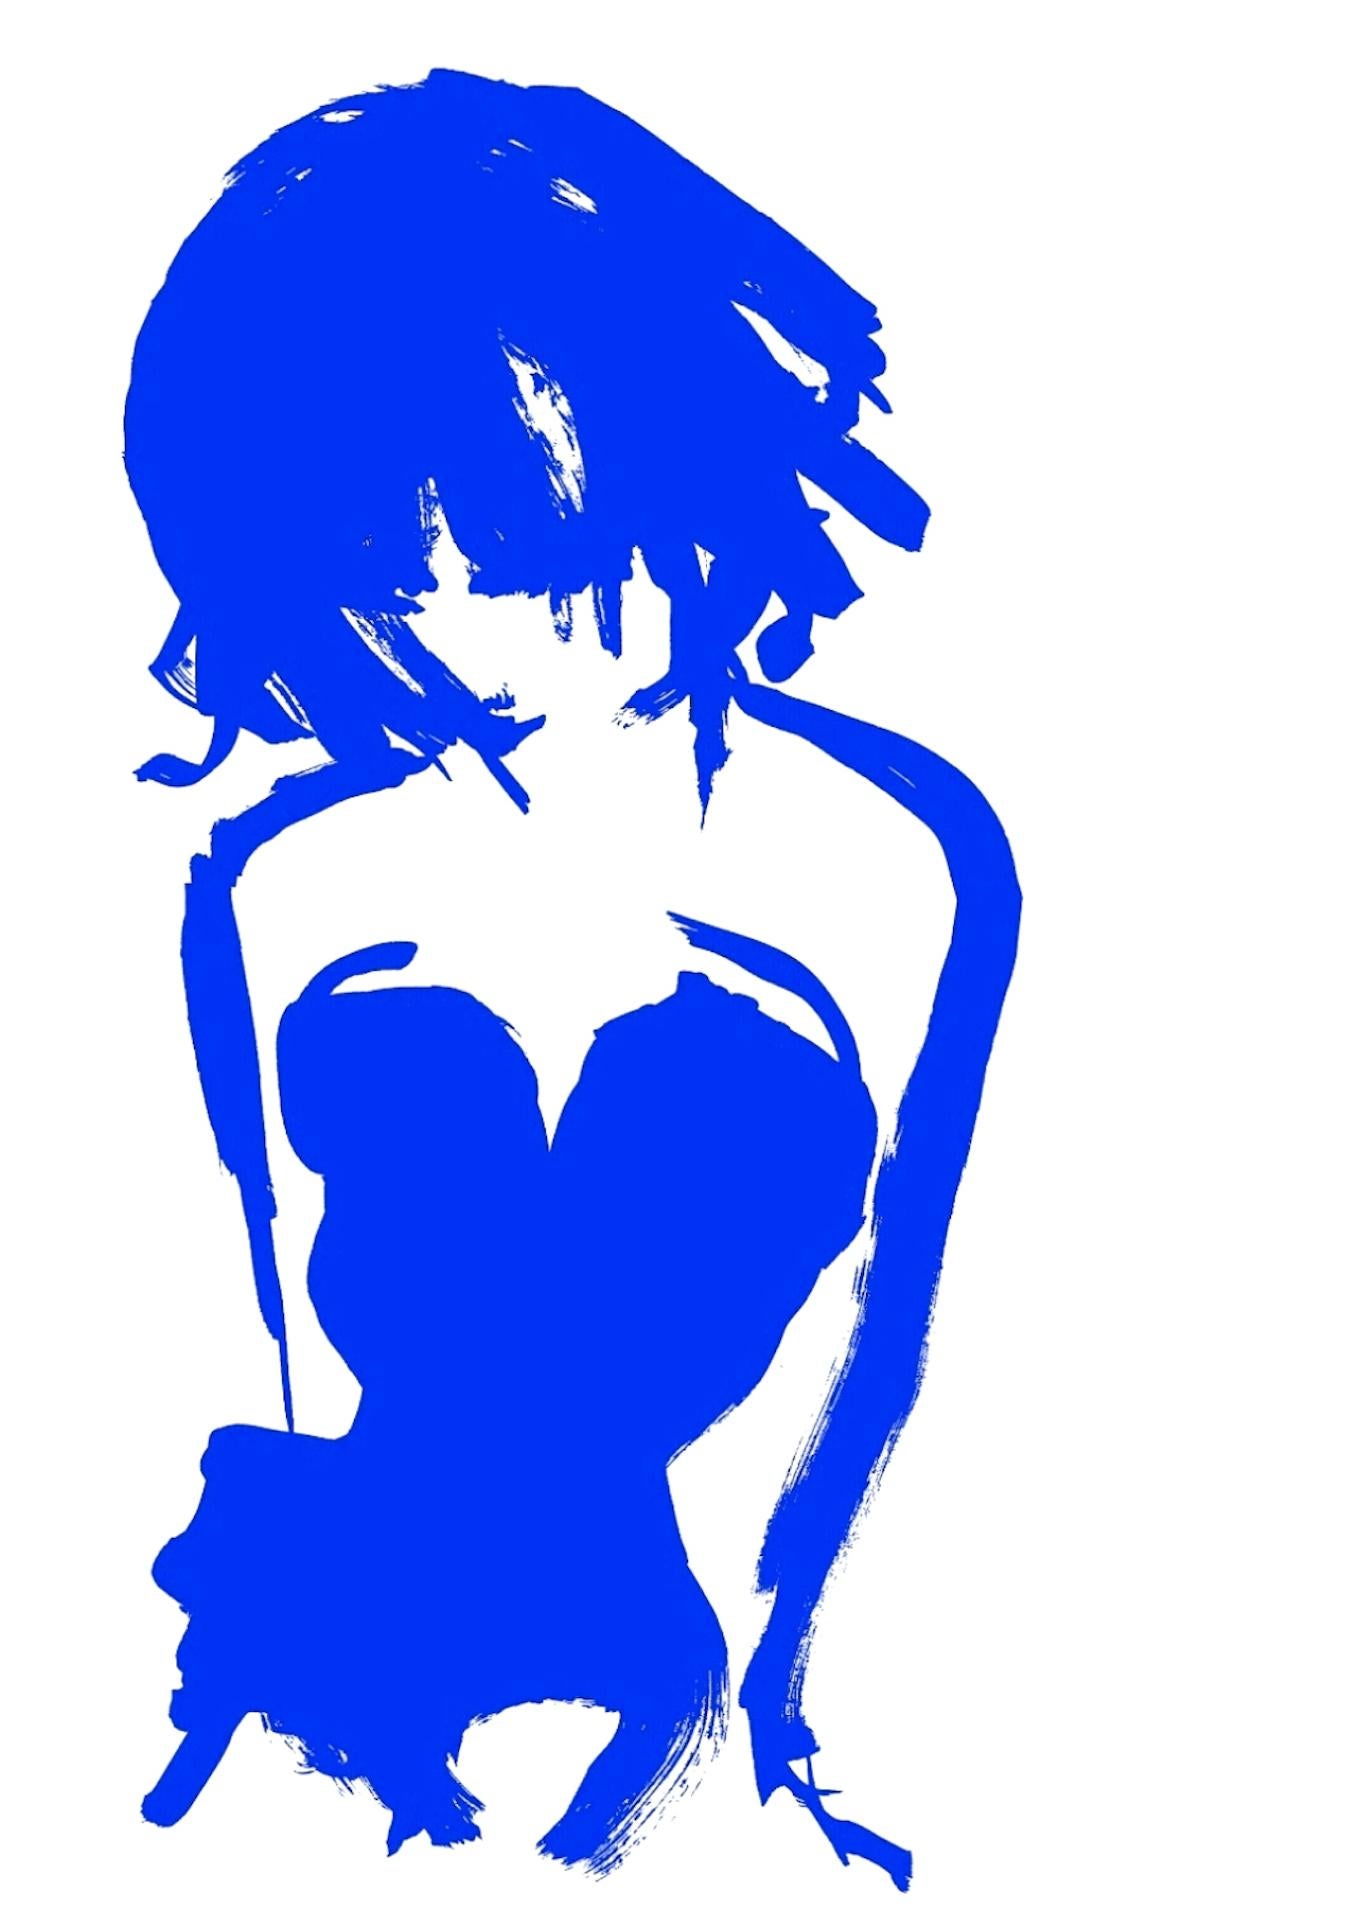 Gavin Dobson
Burlesque Cobalt
Special edition Cobalt version of this best selling screen print.
Edition of 100
Signed and numbered.

Originally from the North East of England, Gavin graduated in Fine art in 2000, and has been building his portfolio